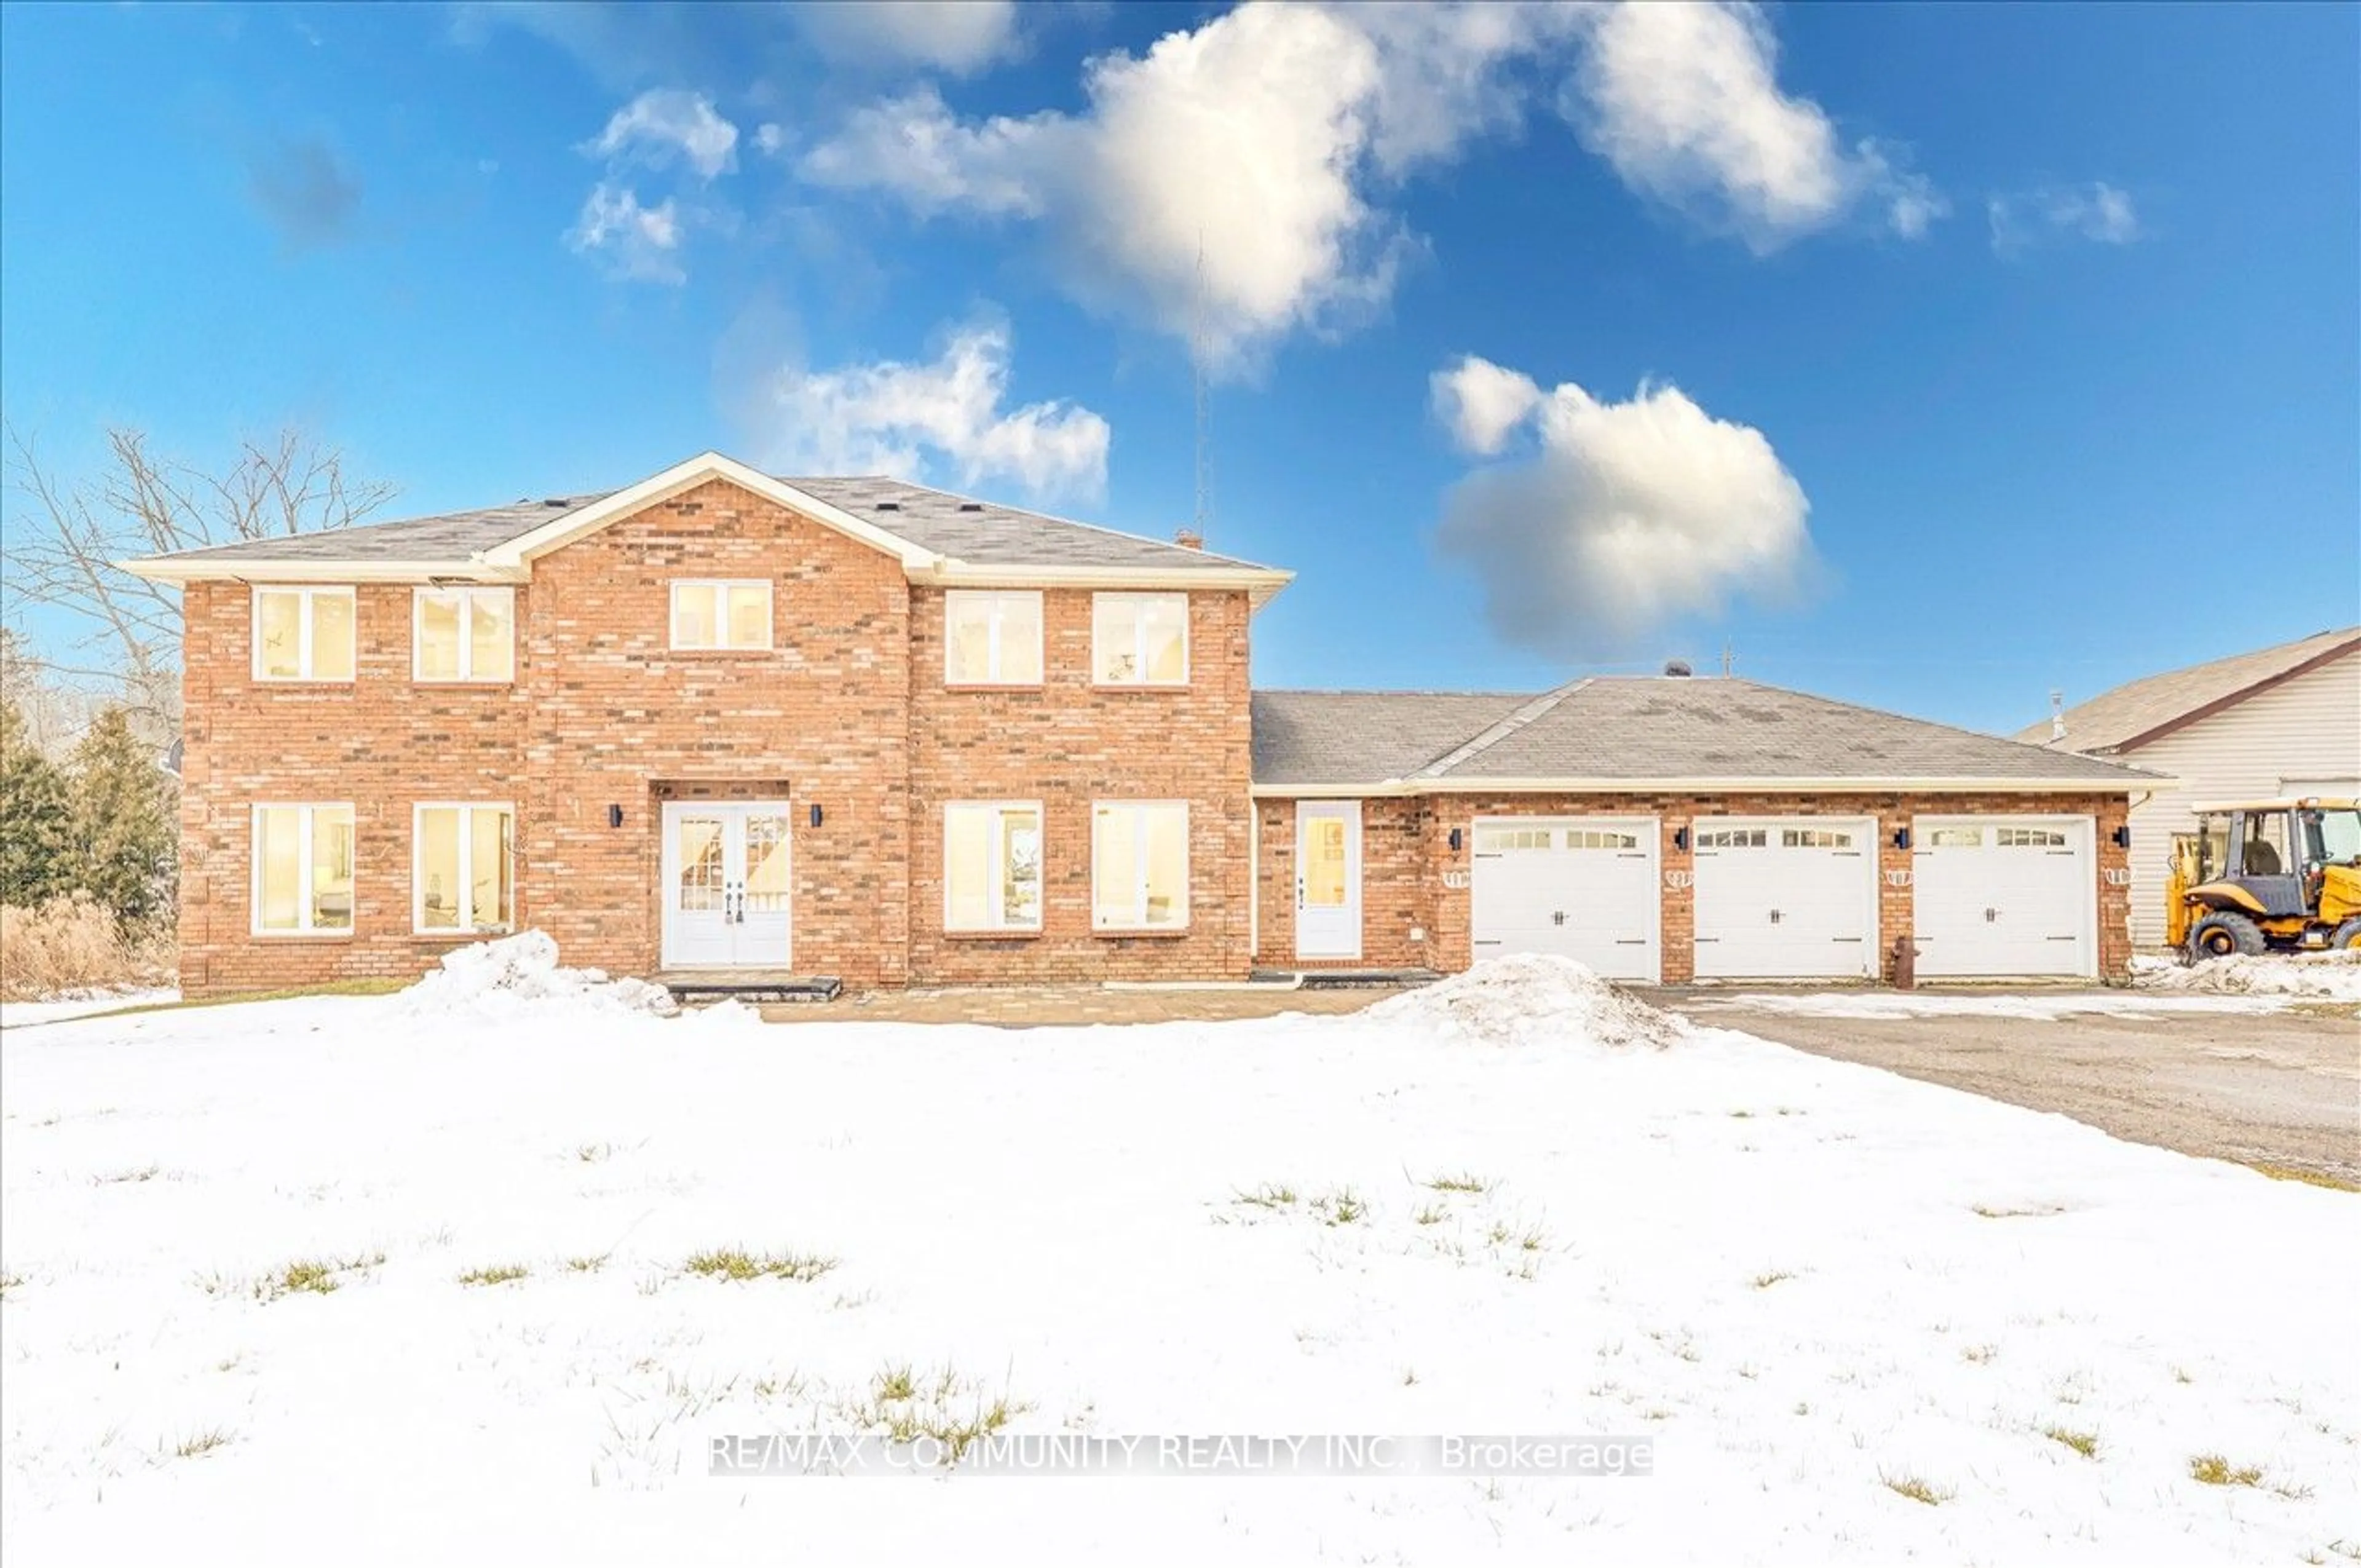 Home with brick exterior material for 3210 York Durham Line #30, Whitchurch-Stouffville Ontario L9P 0J4